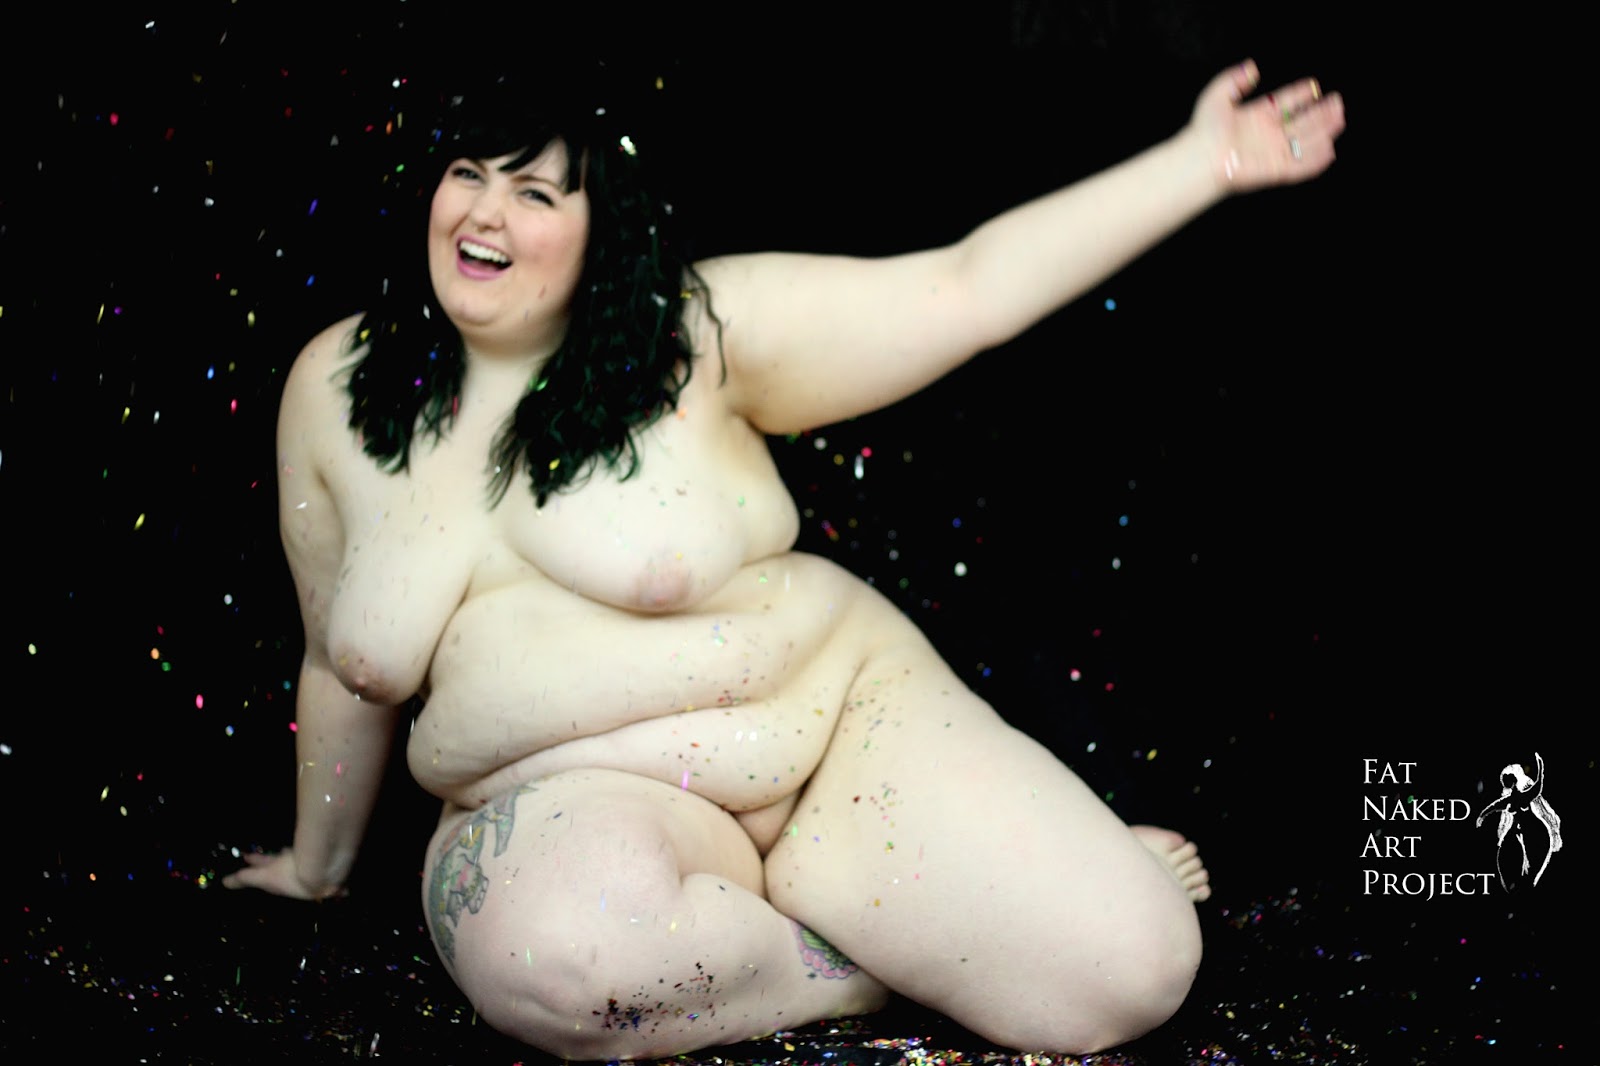 1600px x 1066px - The Fat Naked Art Project | CLOUDY GIRL PICS